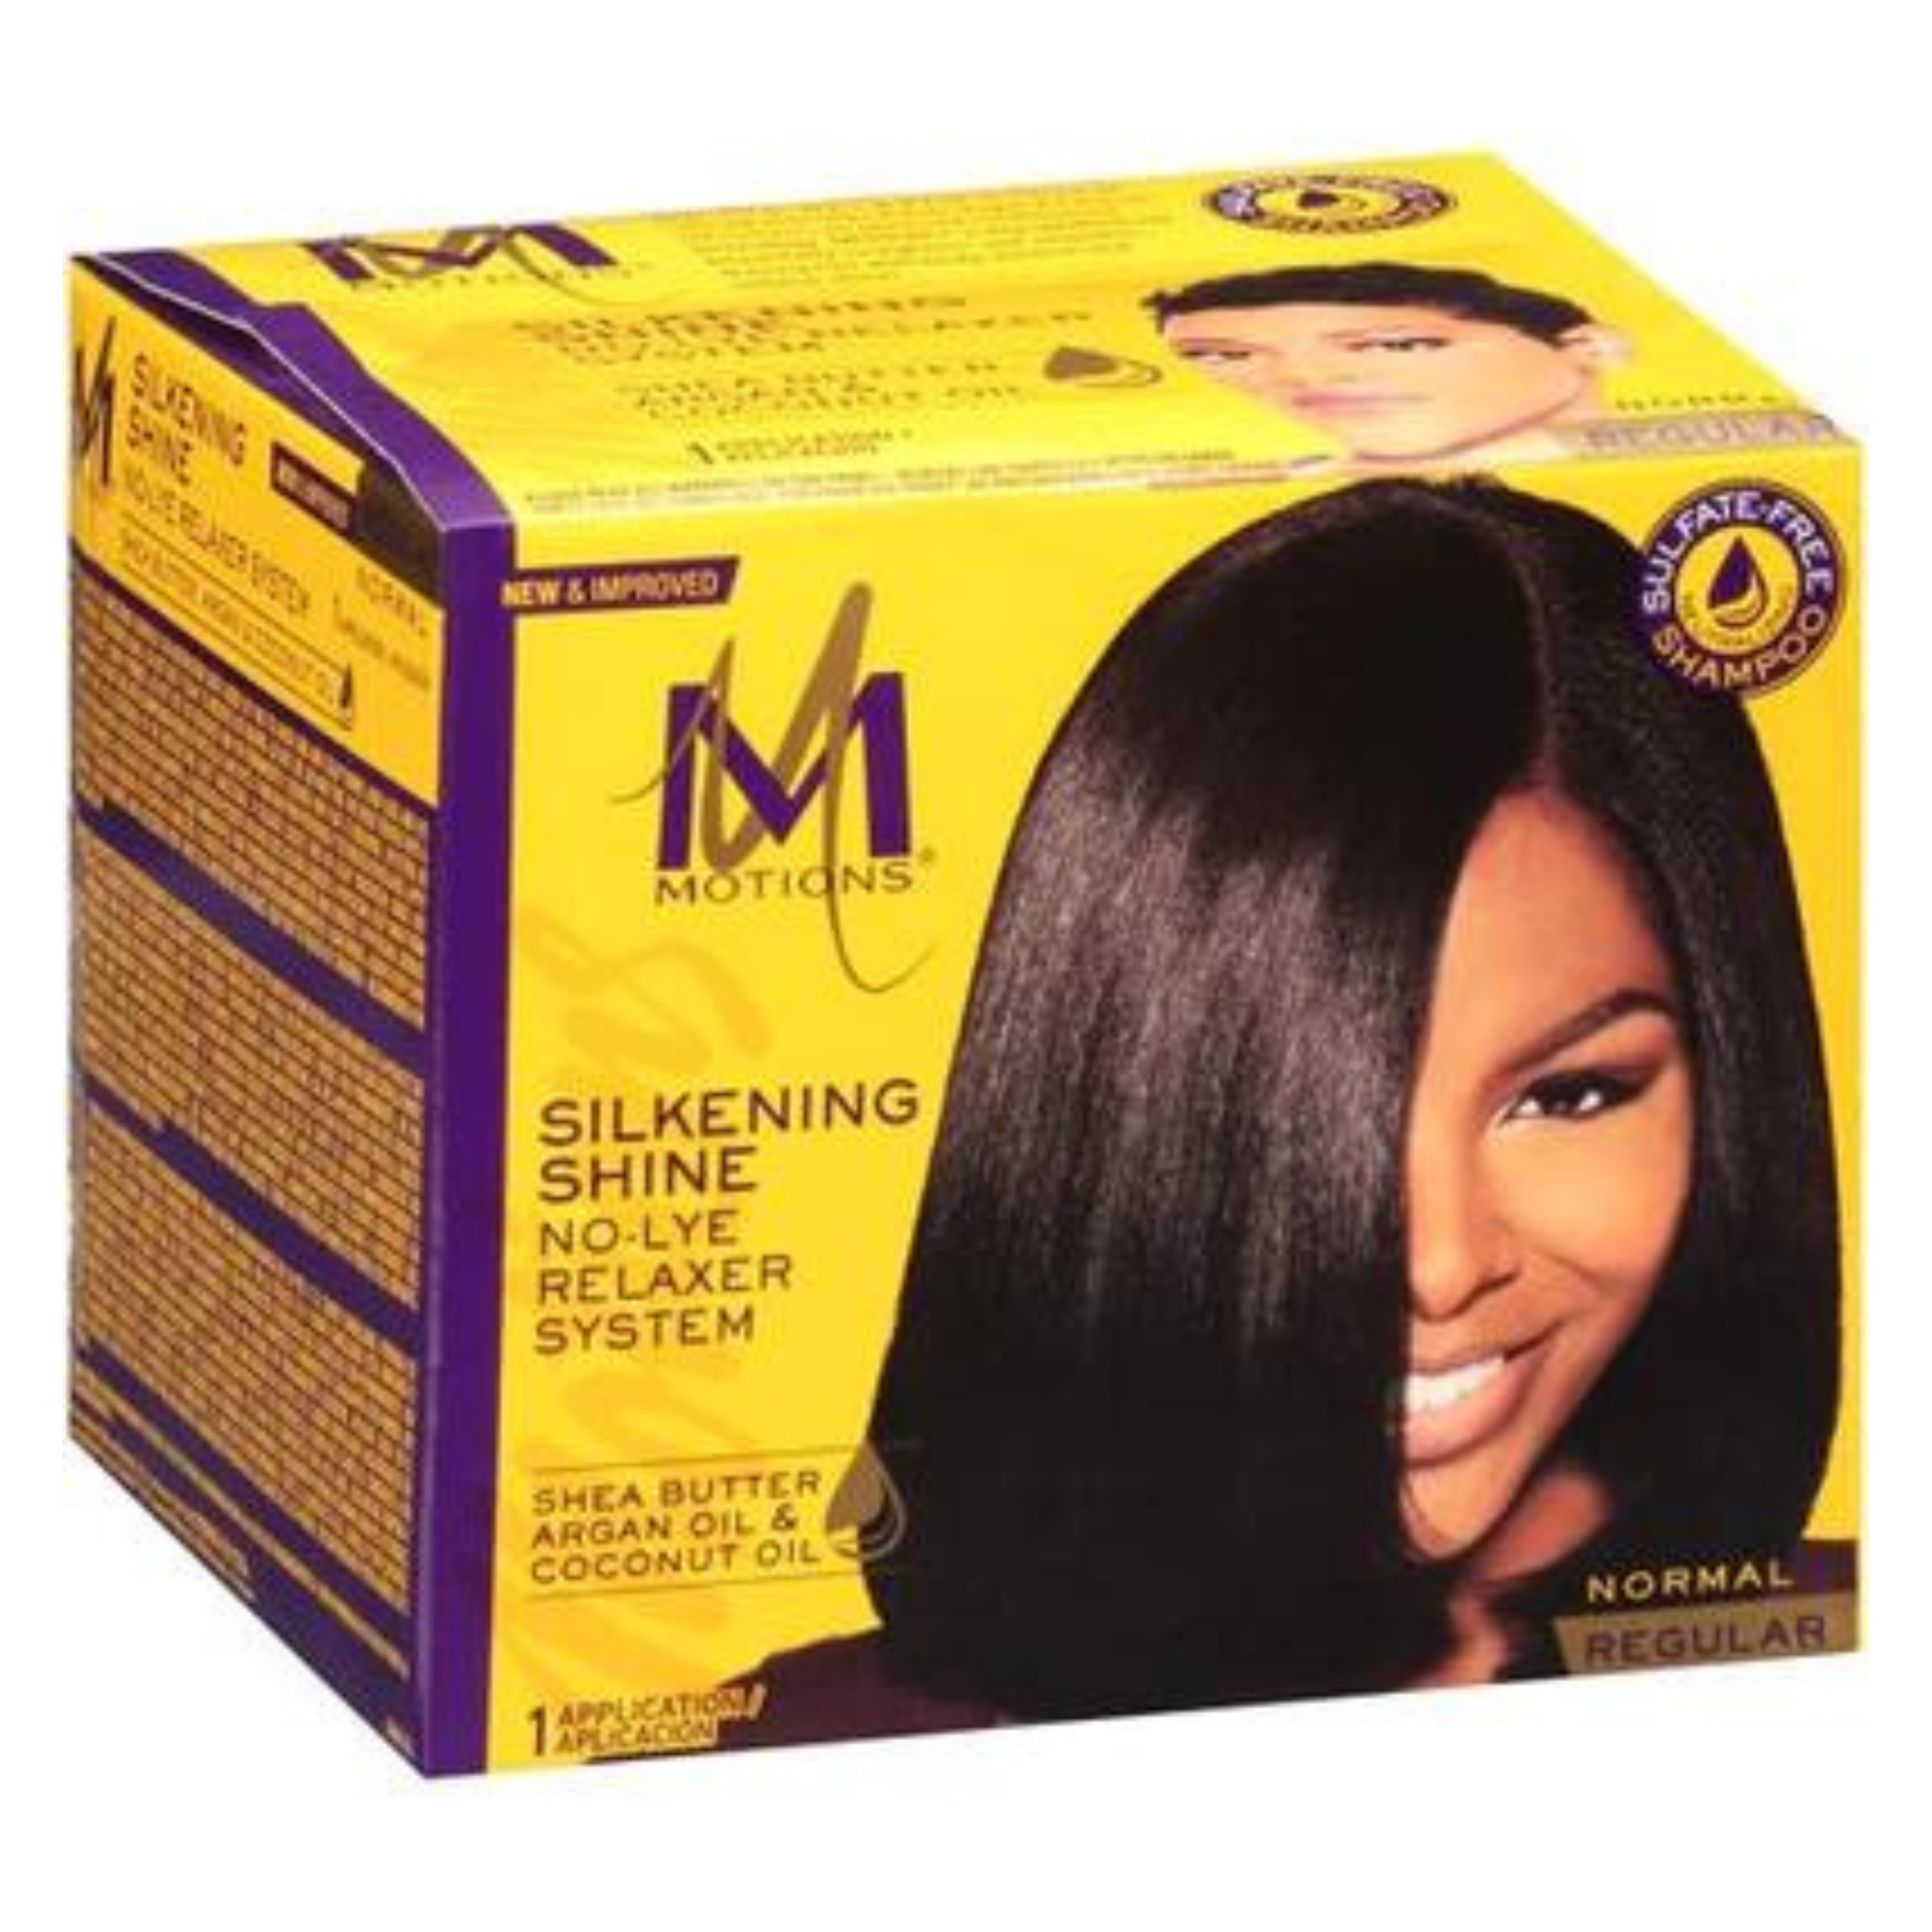 Motions Relaxer System Pack (1 box)